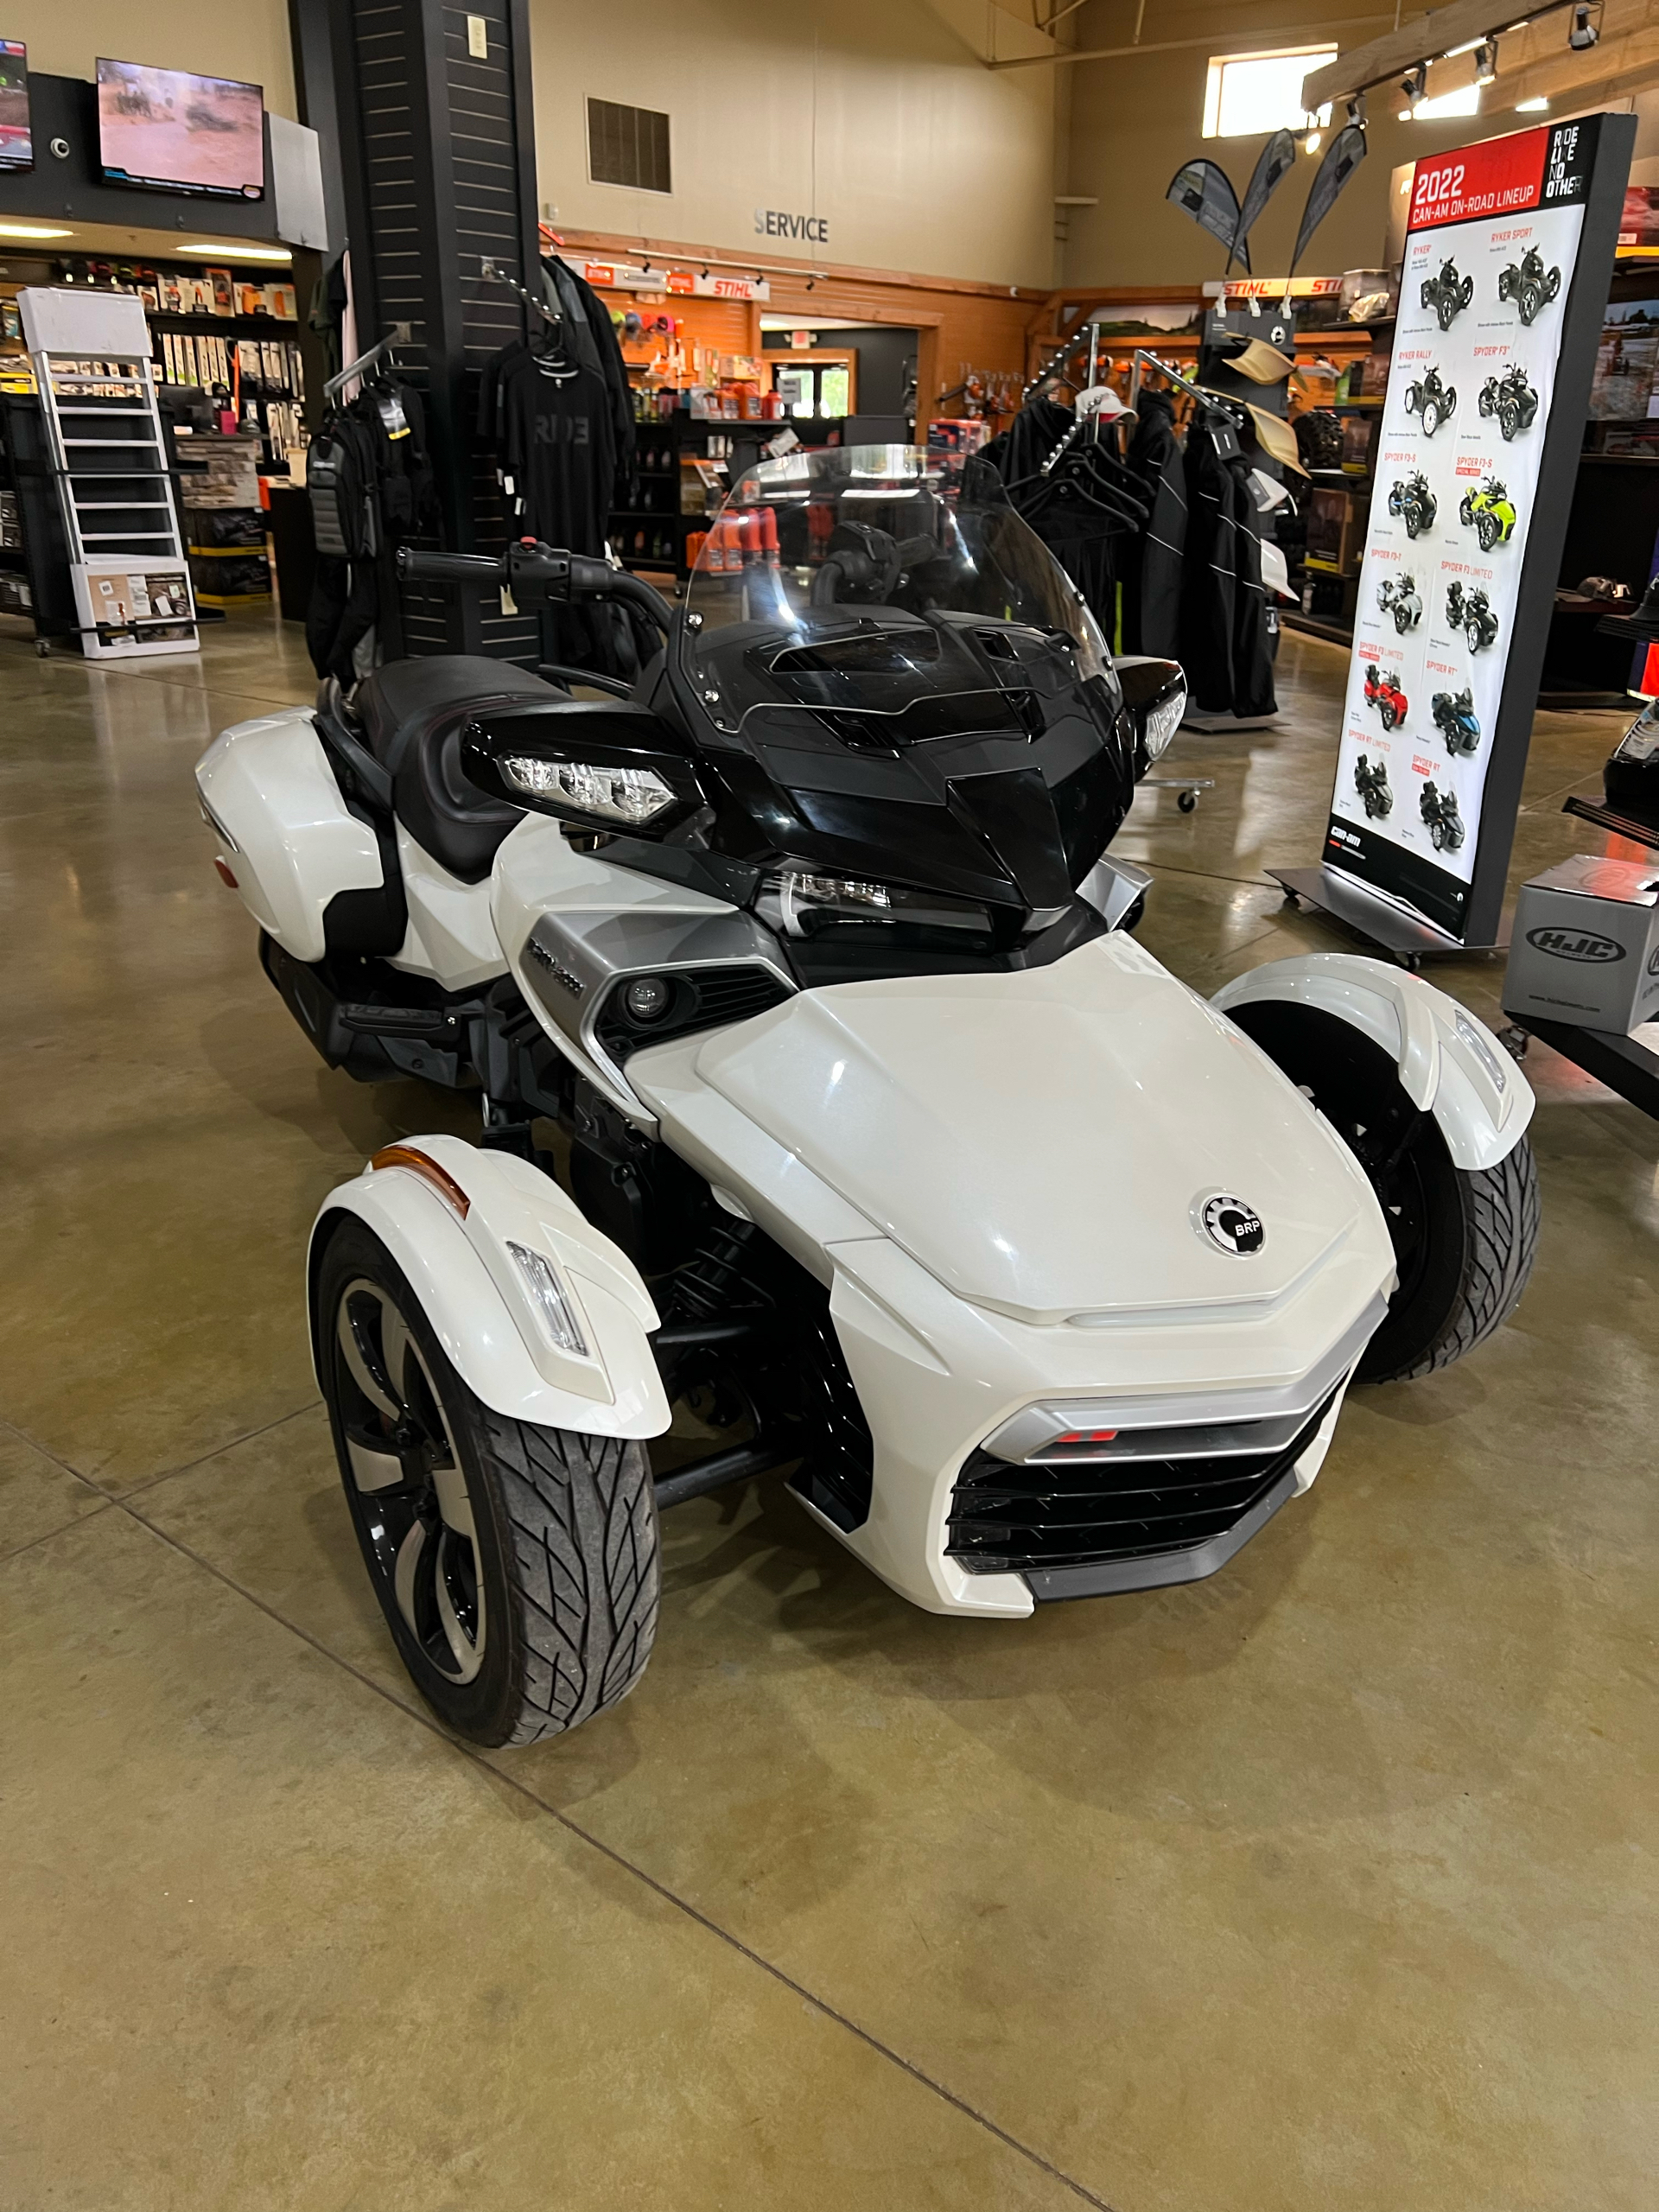 2016 Can-Am Spyder F3-T SE6 in Elma, New York - Photo 1